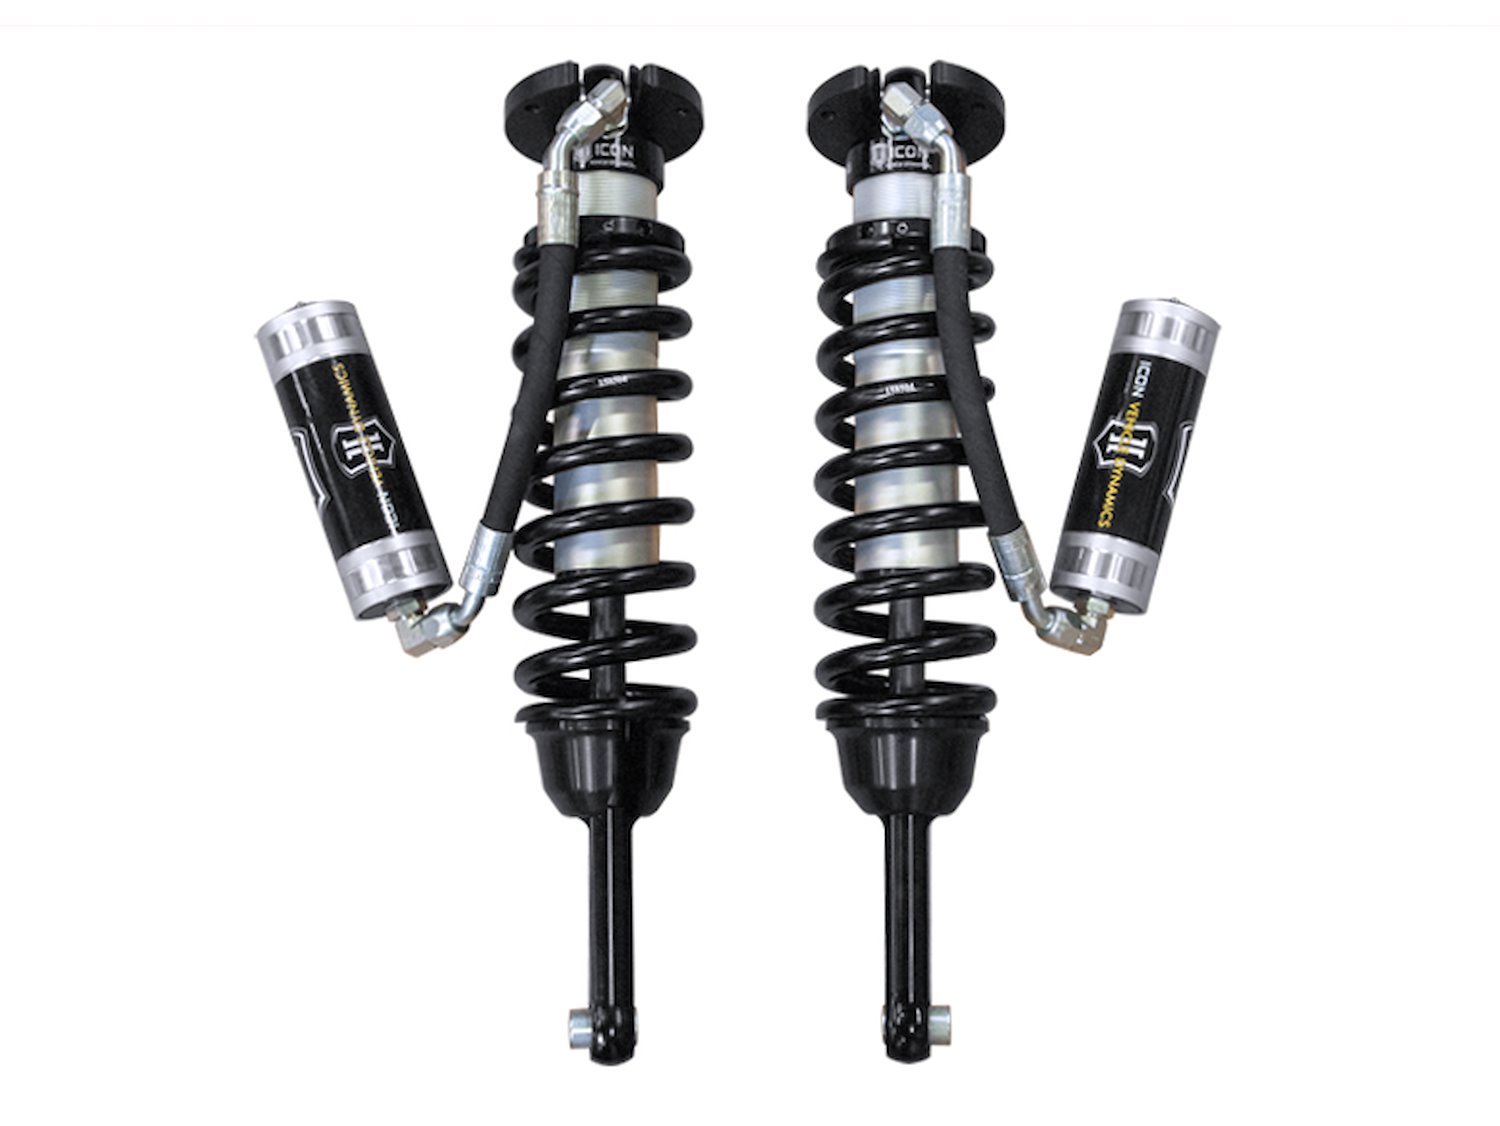 2010-UP FJ CRUISER/2003-UP 4RUNNER/2003-UP GX470/460 EXTENDED TRAVEL 2.5 VS REMOTE RESERVOIR COILOVER KIT WITH 700LB COILS